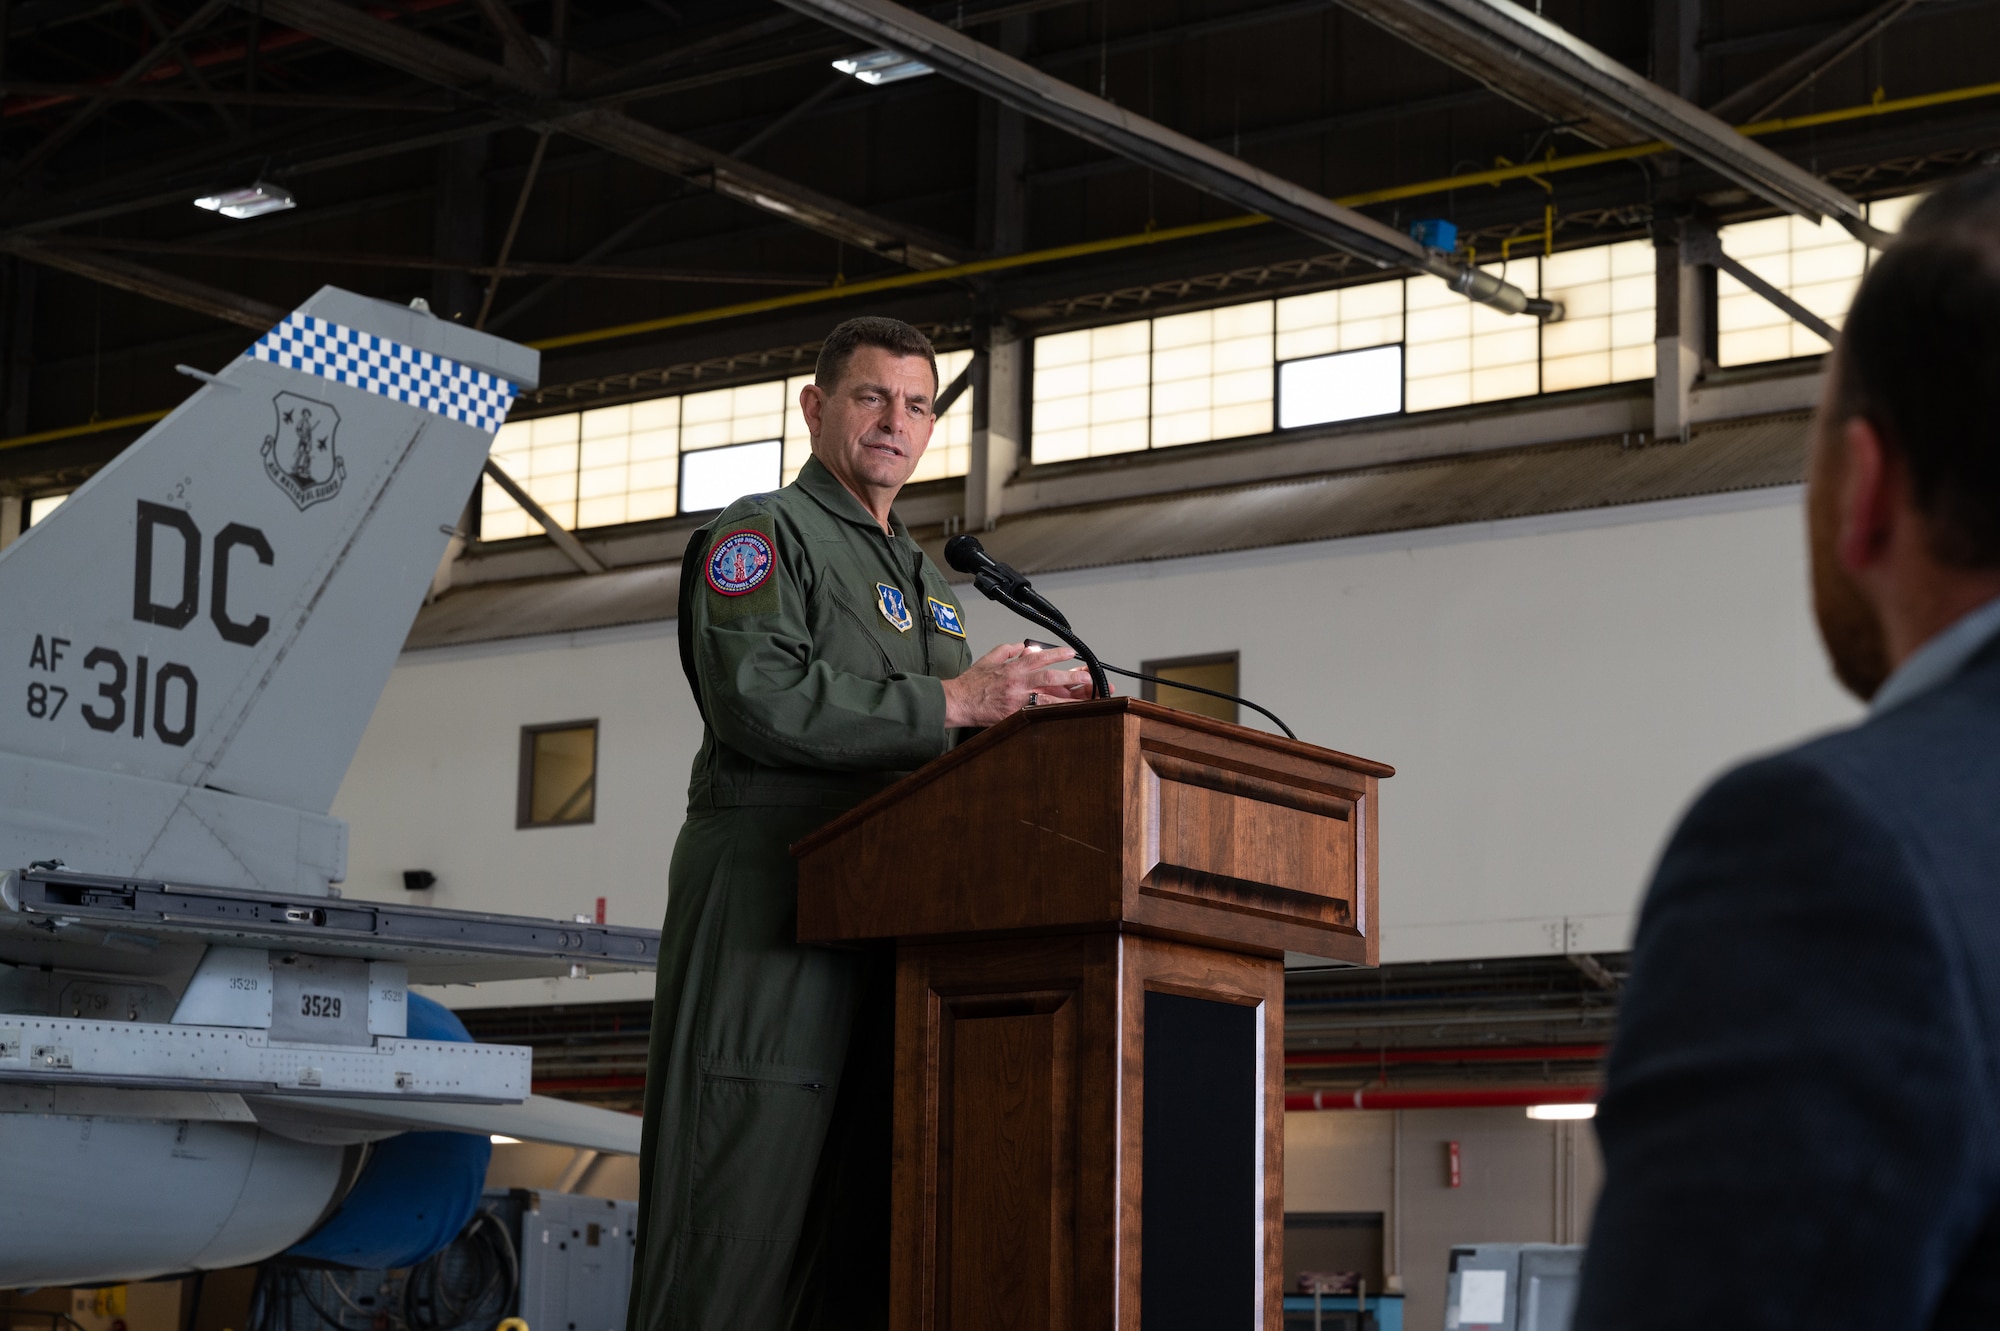 U.S. Air Force Lt. Gen. Michael A. Loh, director, Air National Guard, gives a commemoration speech about the APG-83 Active Electronically Scanned Array radar now equipped on F-16 Fighting Falcon aircraft assigned to 113th Wing, District of Columbia National Guard, on Joint Base Andrews, Maryland, June 9, 2022.